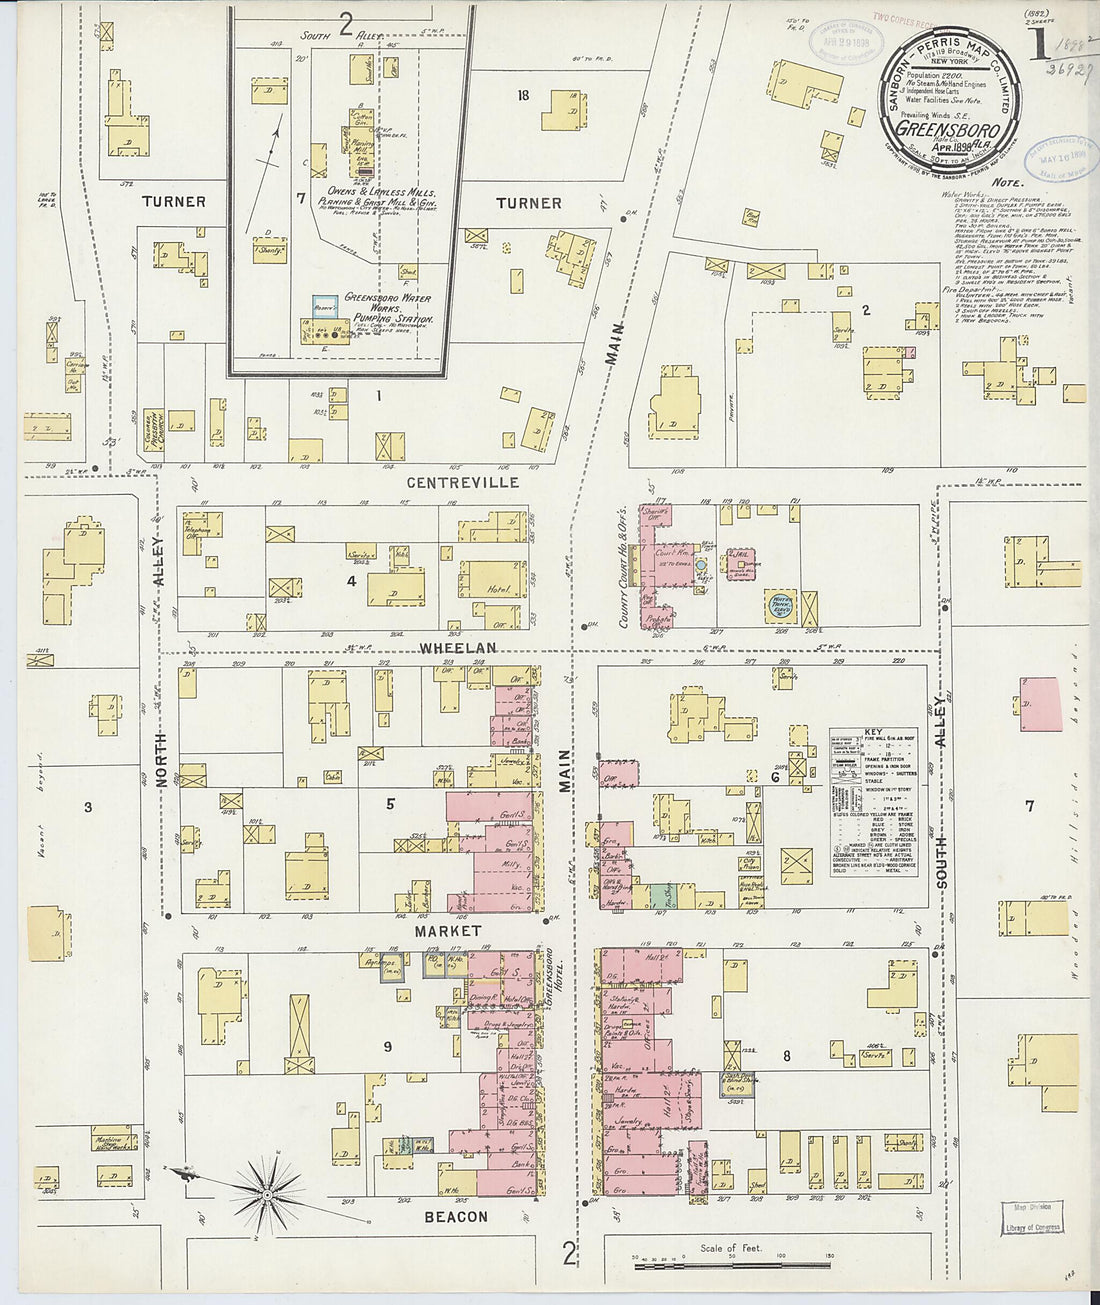 This old map of Greensboro, Hale County, Alabama was created by Sanborn Map Company in 1898